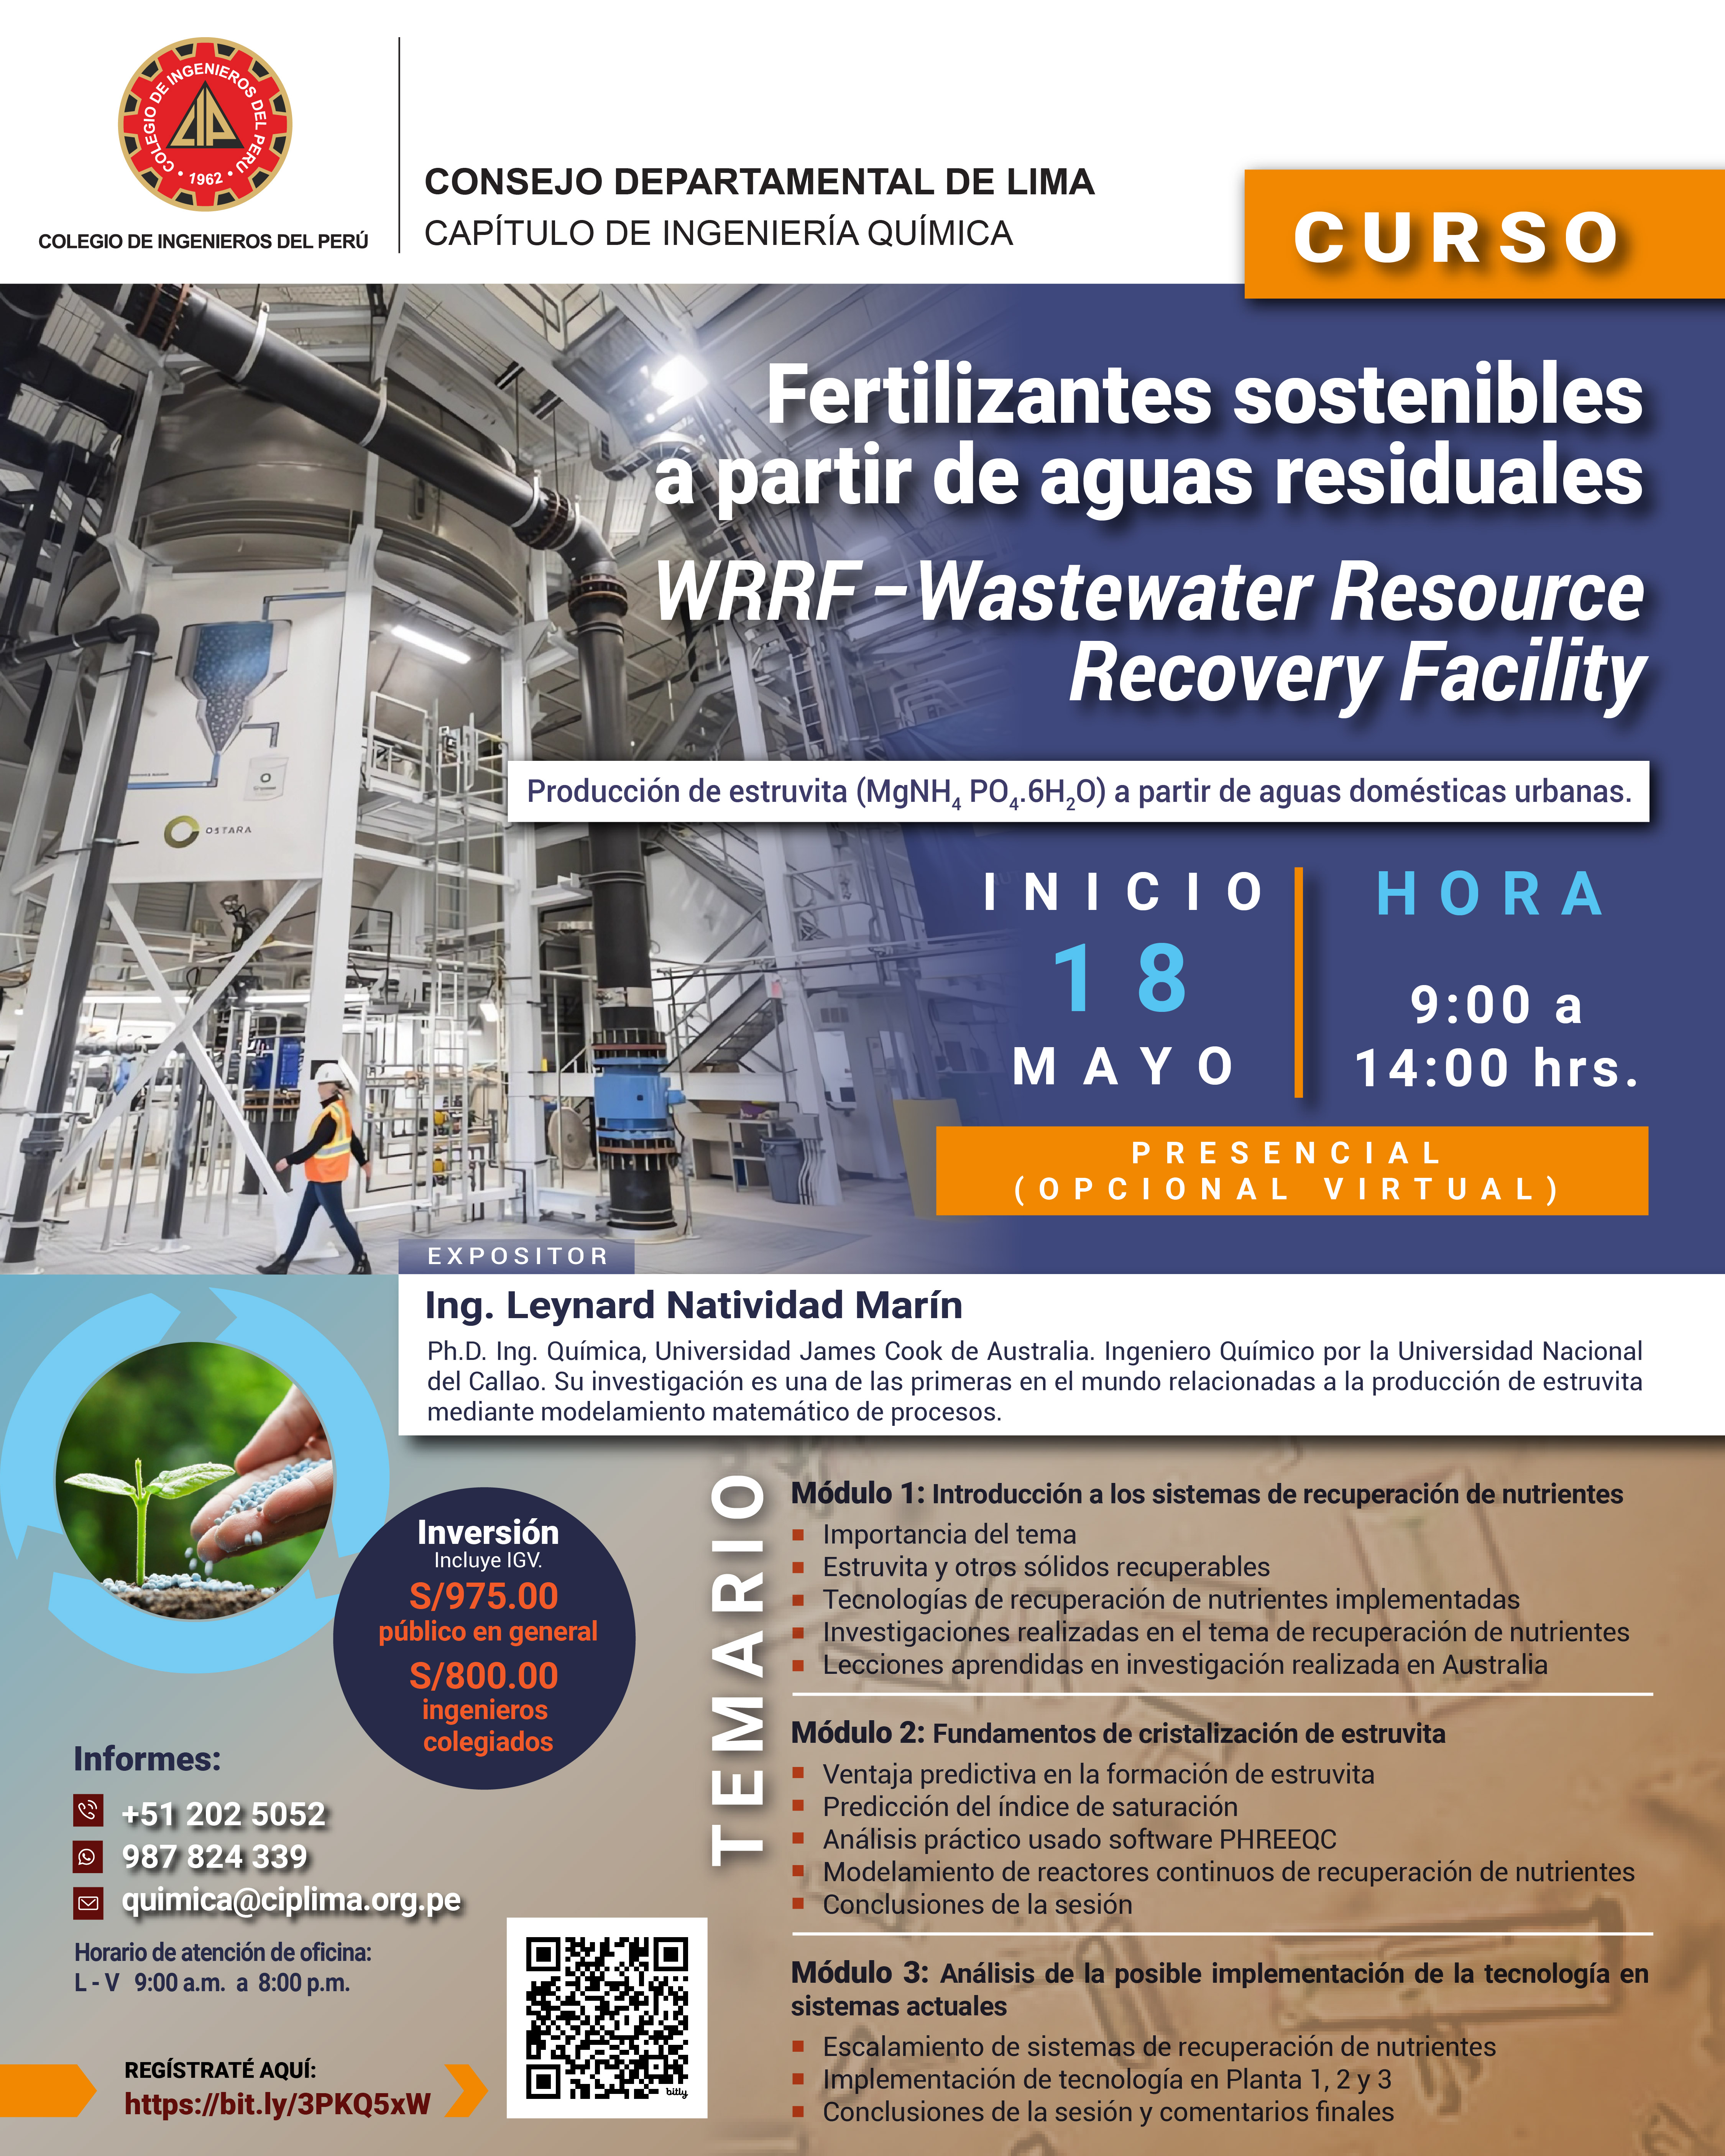 Fertilizantes sostenibles a partir de aguas residuales. WRRF – Wastewater Resource Recovery Facility